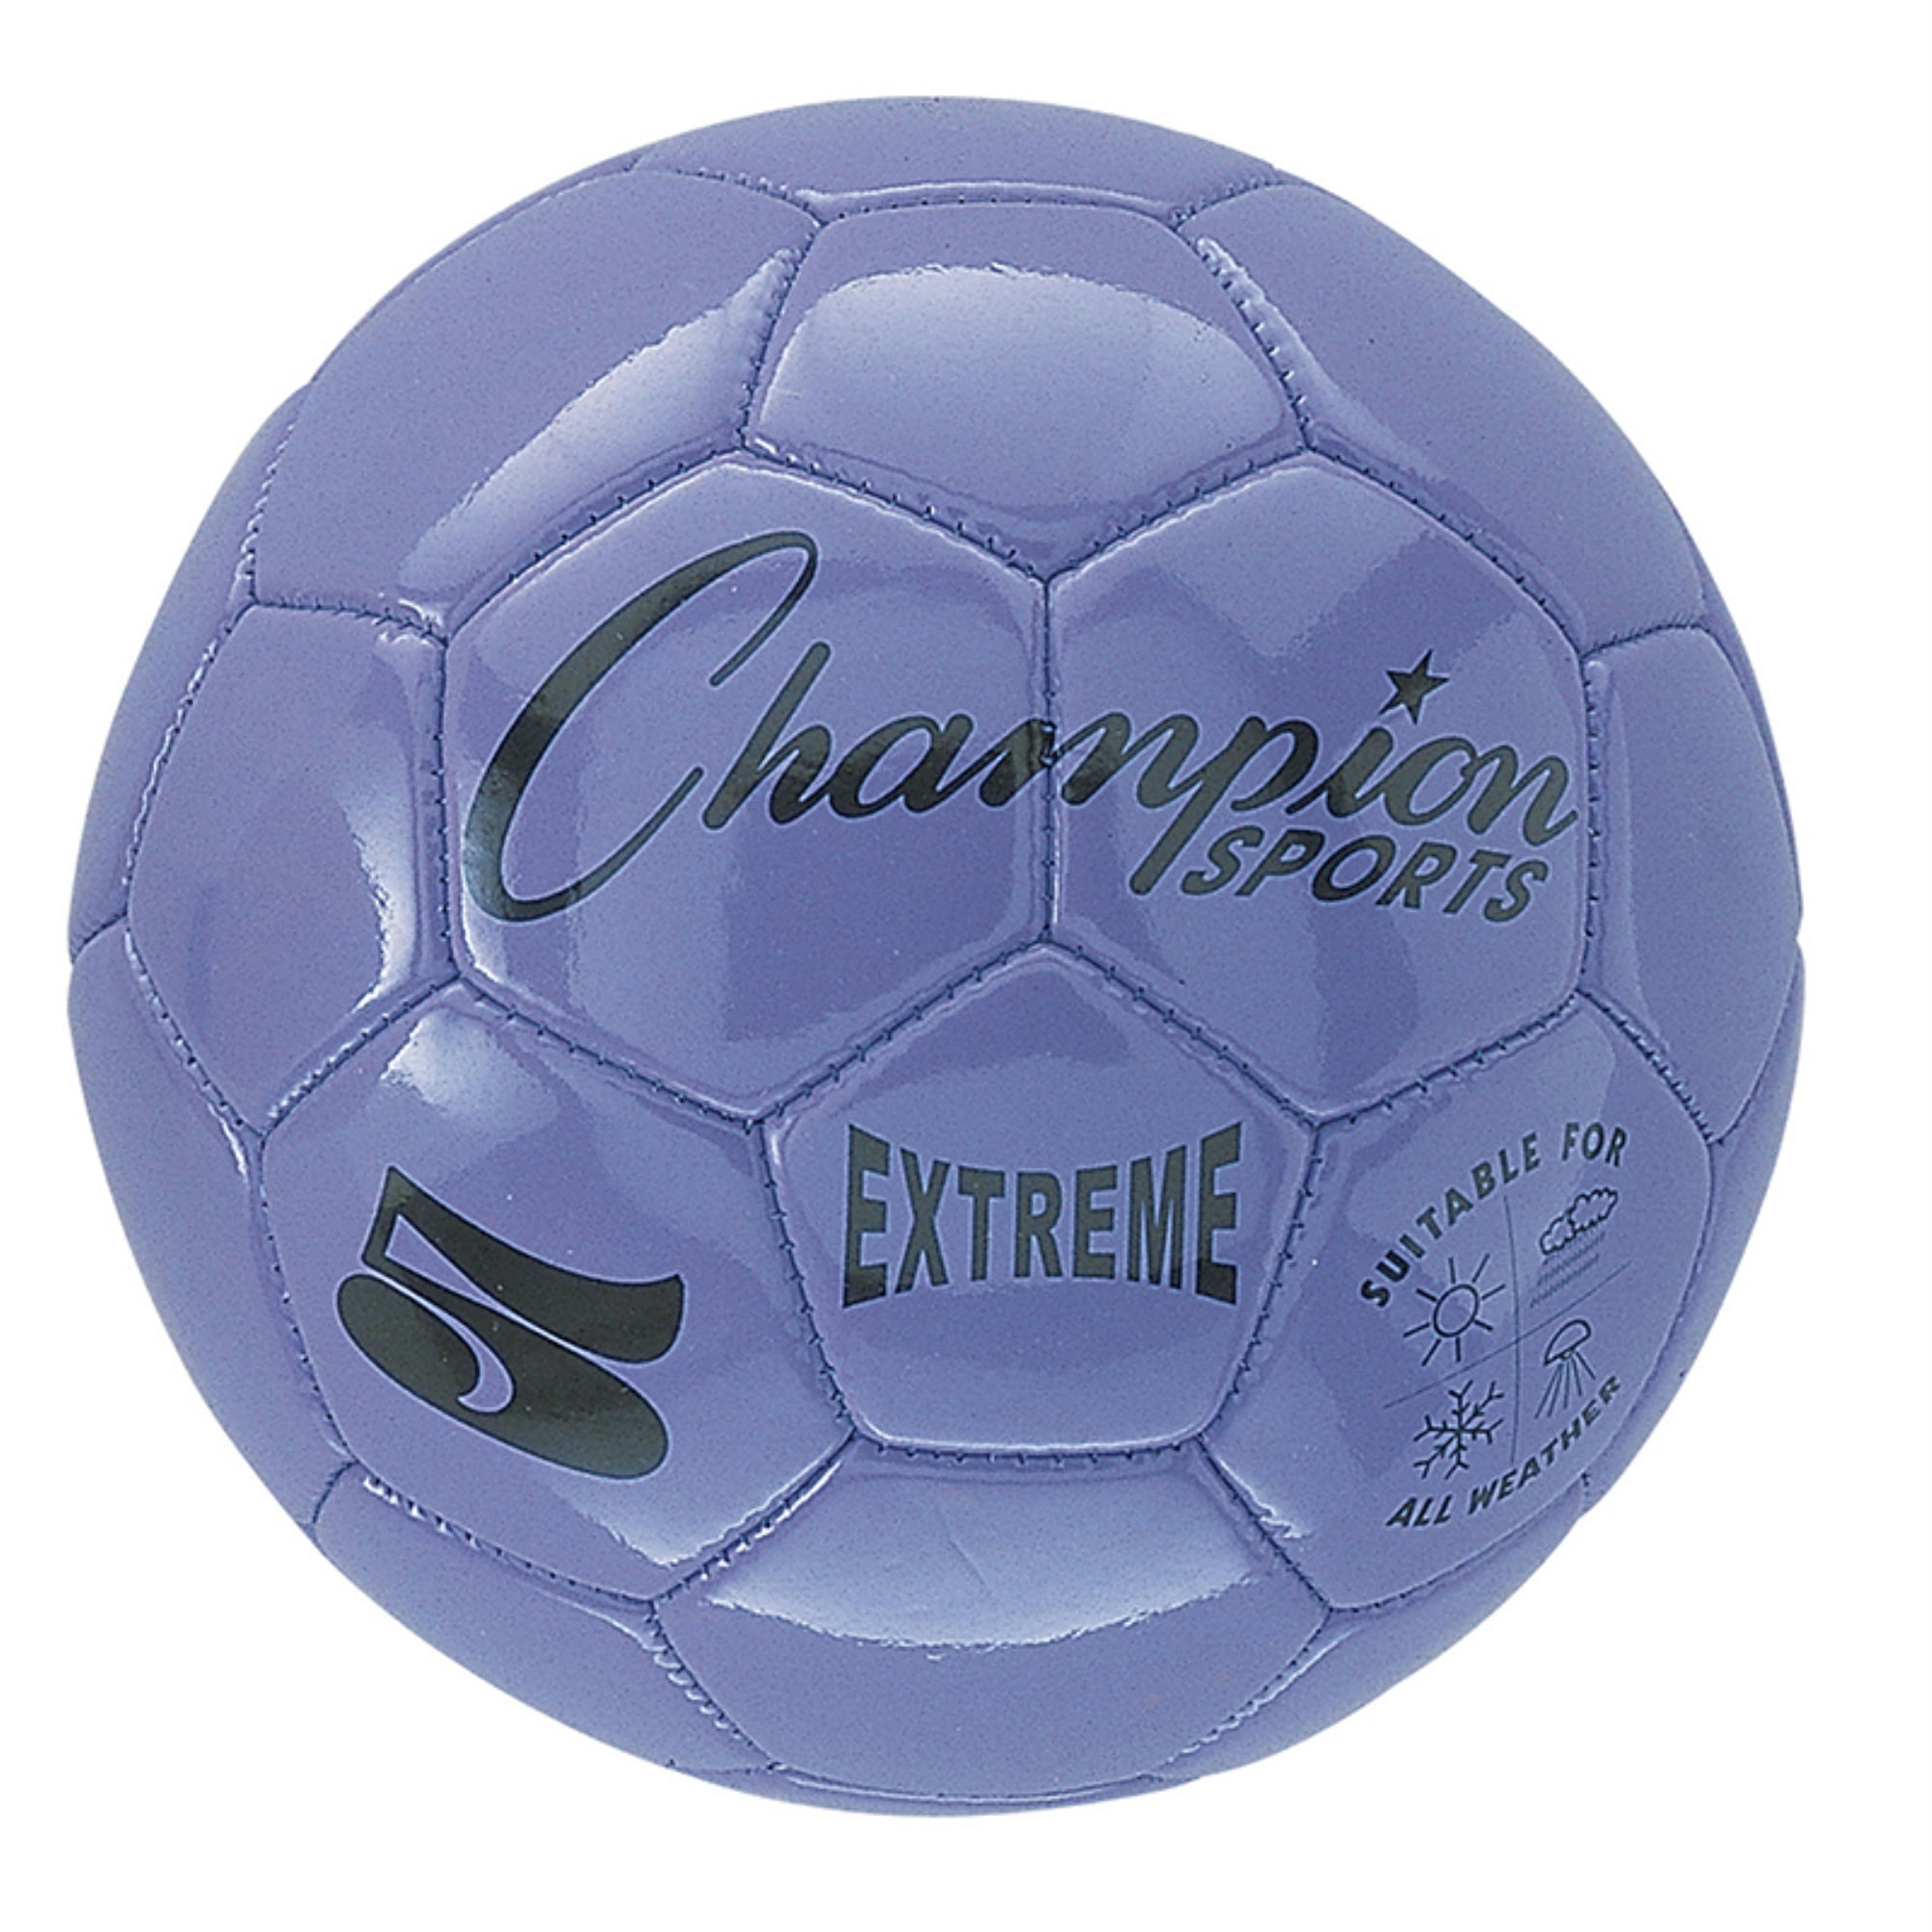 Champion Sports Extreme Soccer Ball Size 5 Purple EX5PR for sale online 